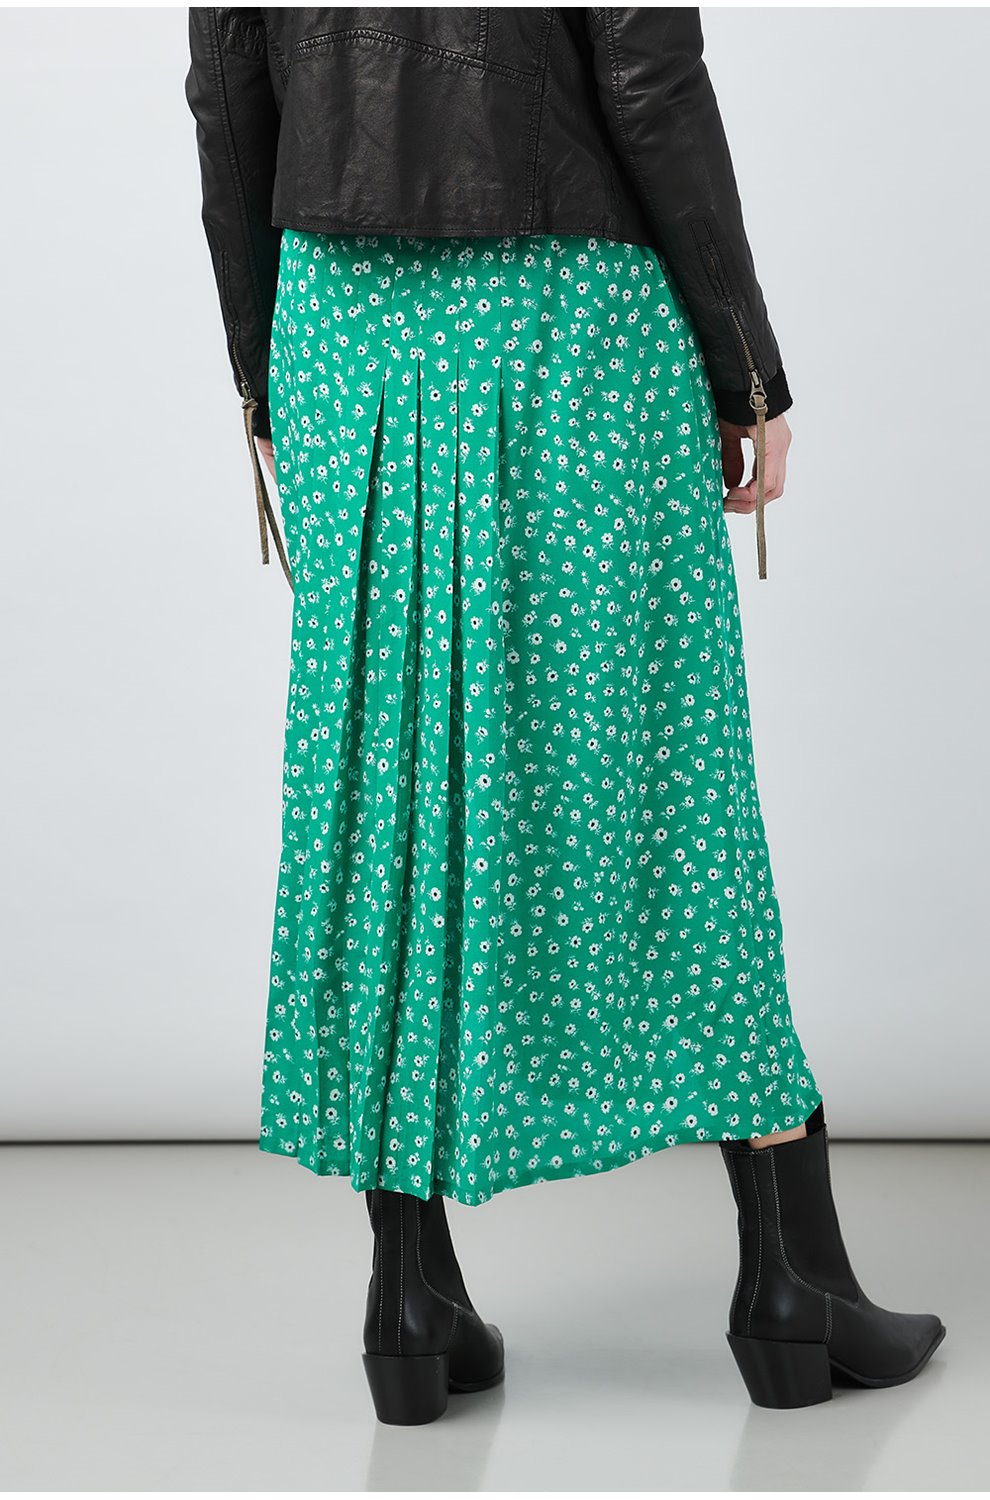 Trilogy Stores | Georgia Skirt in Green Daisy